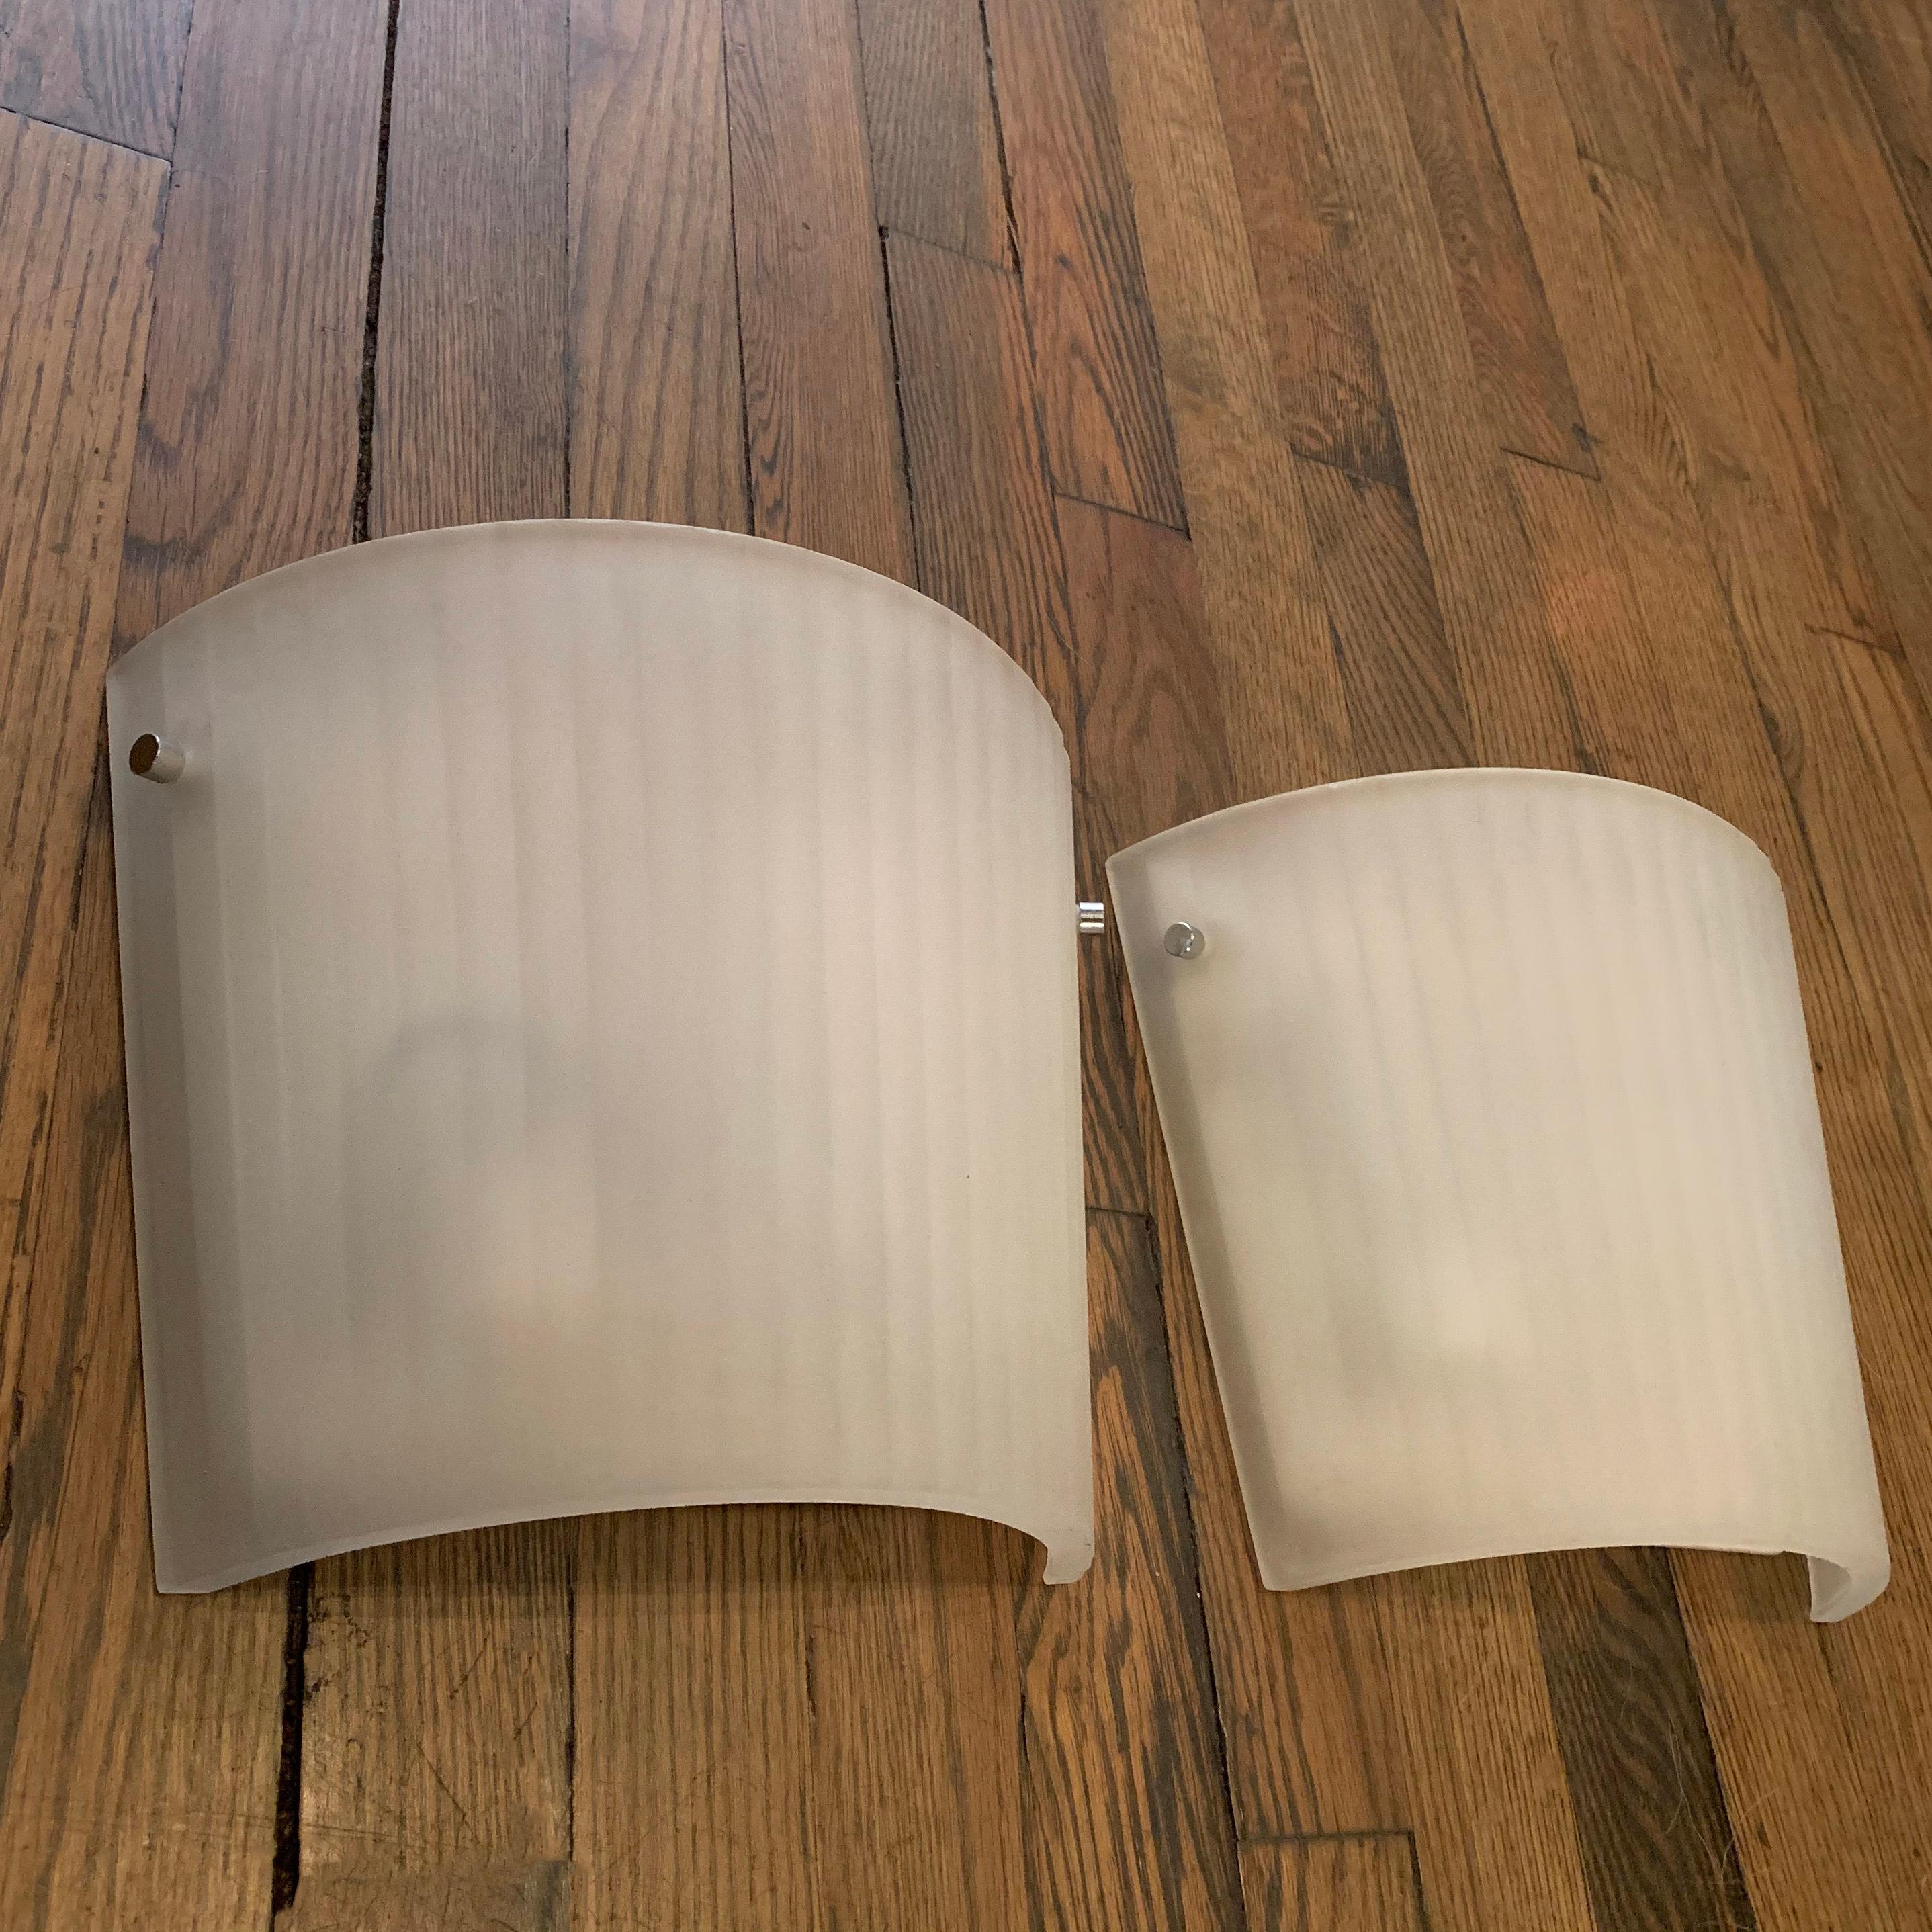 20th Century Italian Frosted Glass Wall Sconce Lights by Rodolfo Dordoni for Artemide